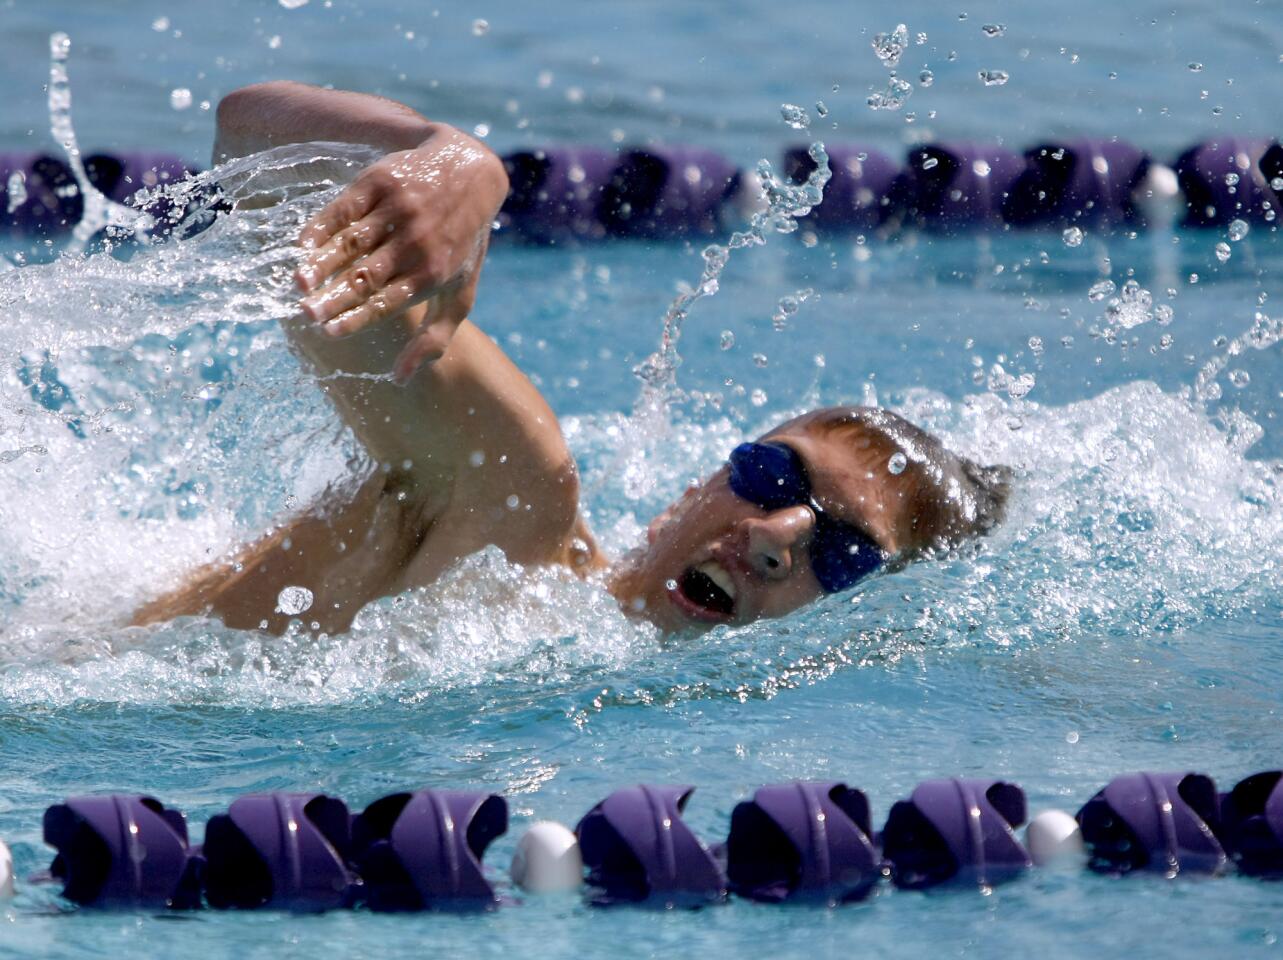 Clark Magnet High senior and Hoover High swimmer Jason Barbar swims to a first place finish in the Varsity 200 freestyle event during meet at Hoover High School in Glendale on Tuesday, April 23, 2013.